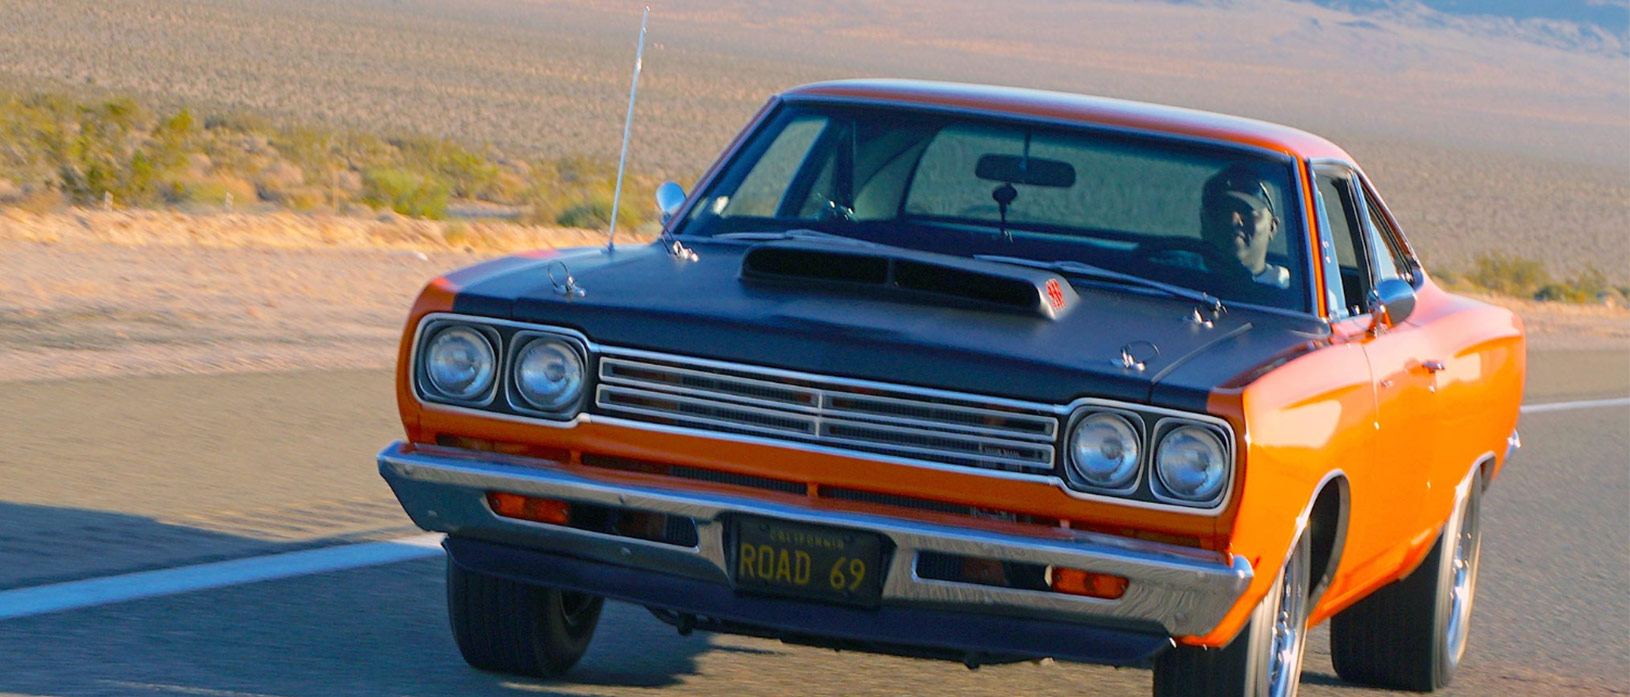 The Ultimate Weekend Project: 1969 Road Runner